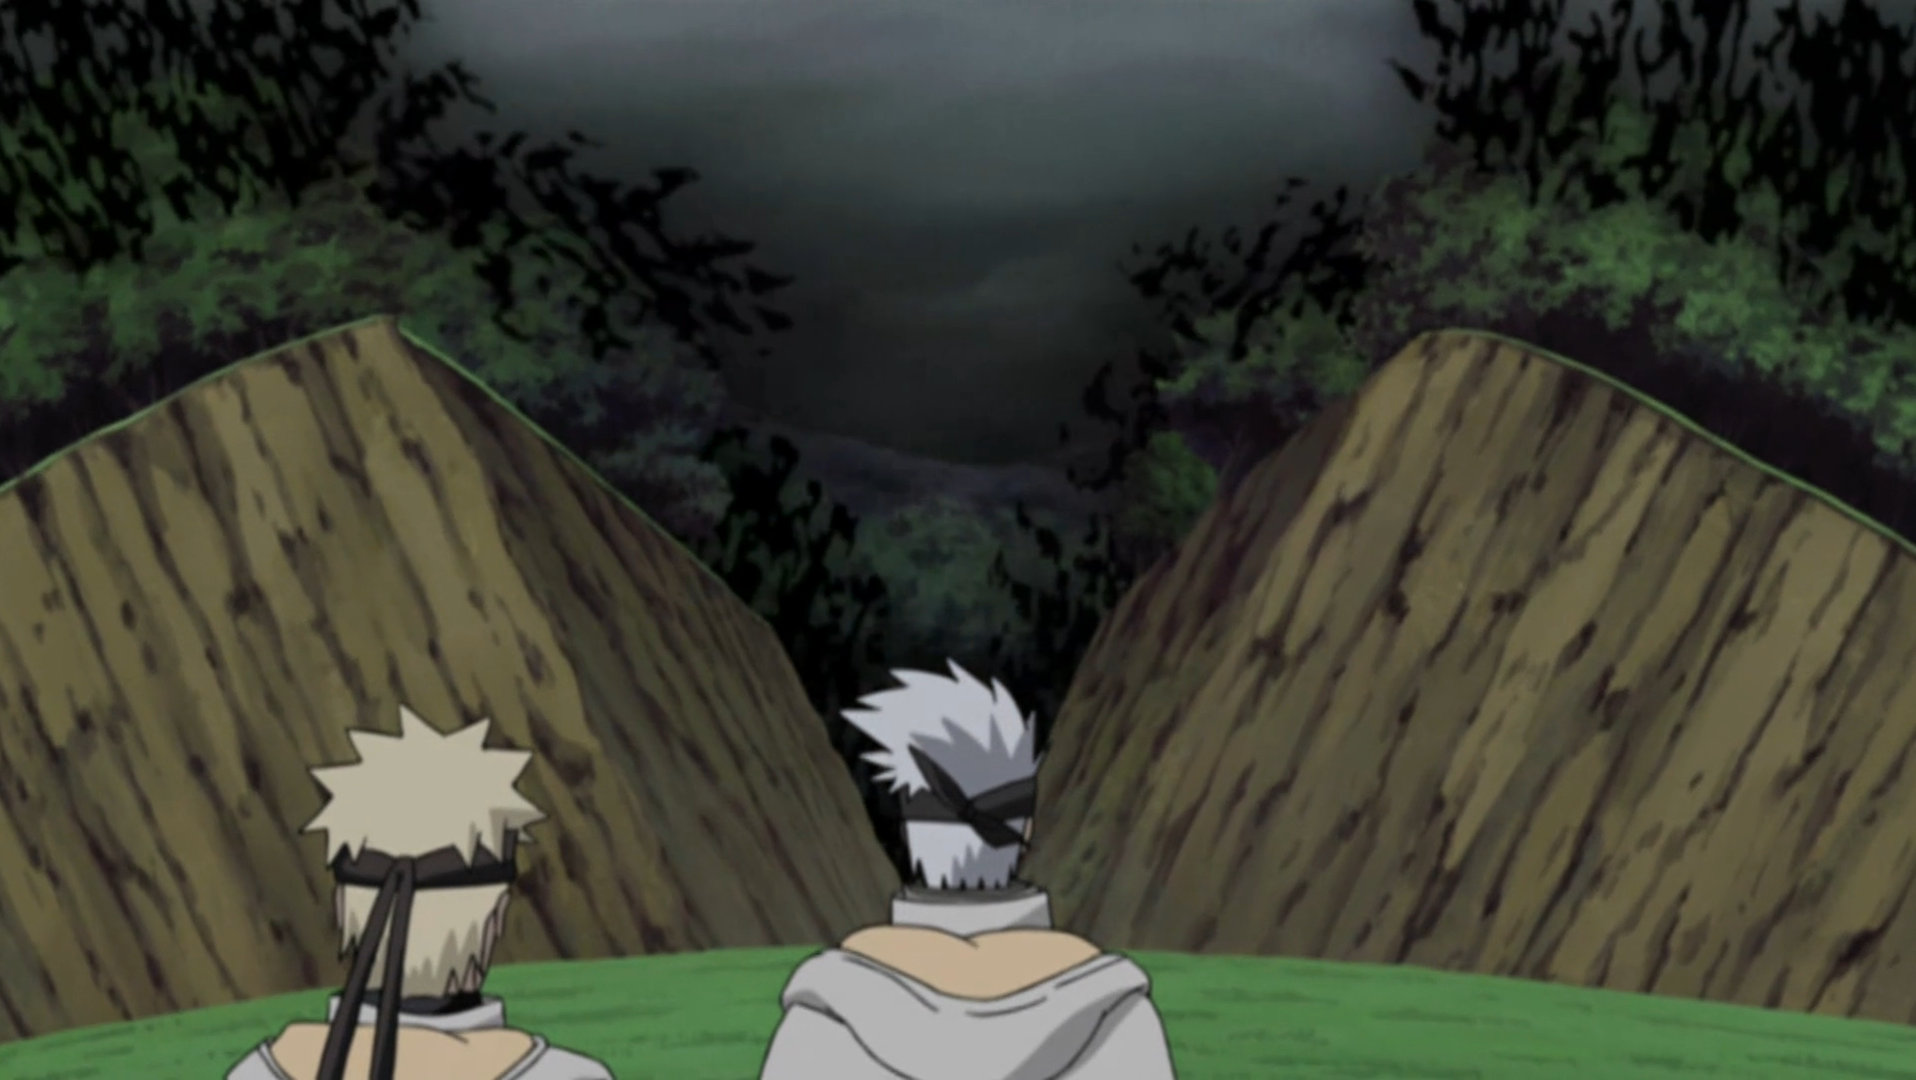 https://vignette.wikia.nocookie.net/naruto/images/9/9a/Earth_Release_Earth_Flow_Divide.PNG/revision/latest?cb=20150605102619